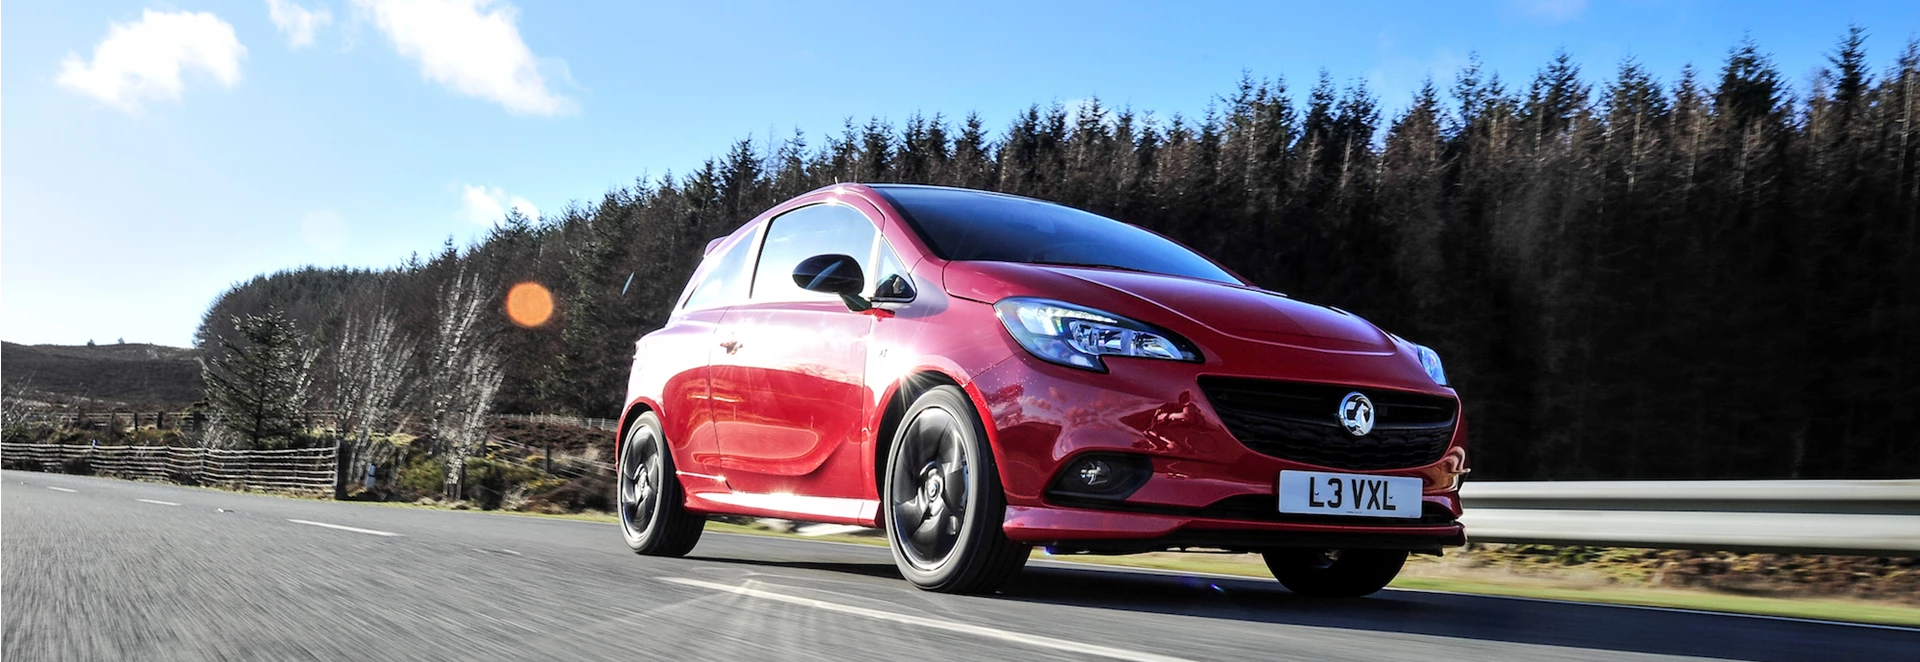 Vauxhall updates Corsa with cleaner engines and new tech 